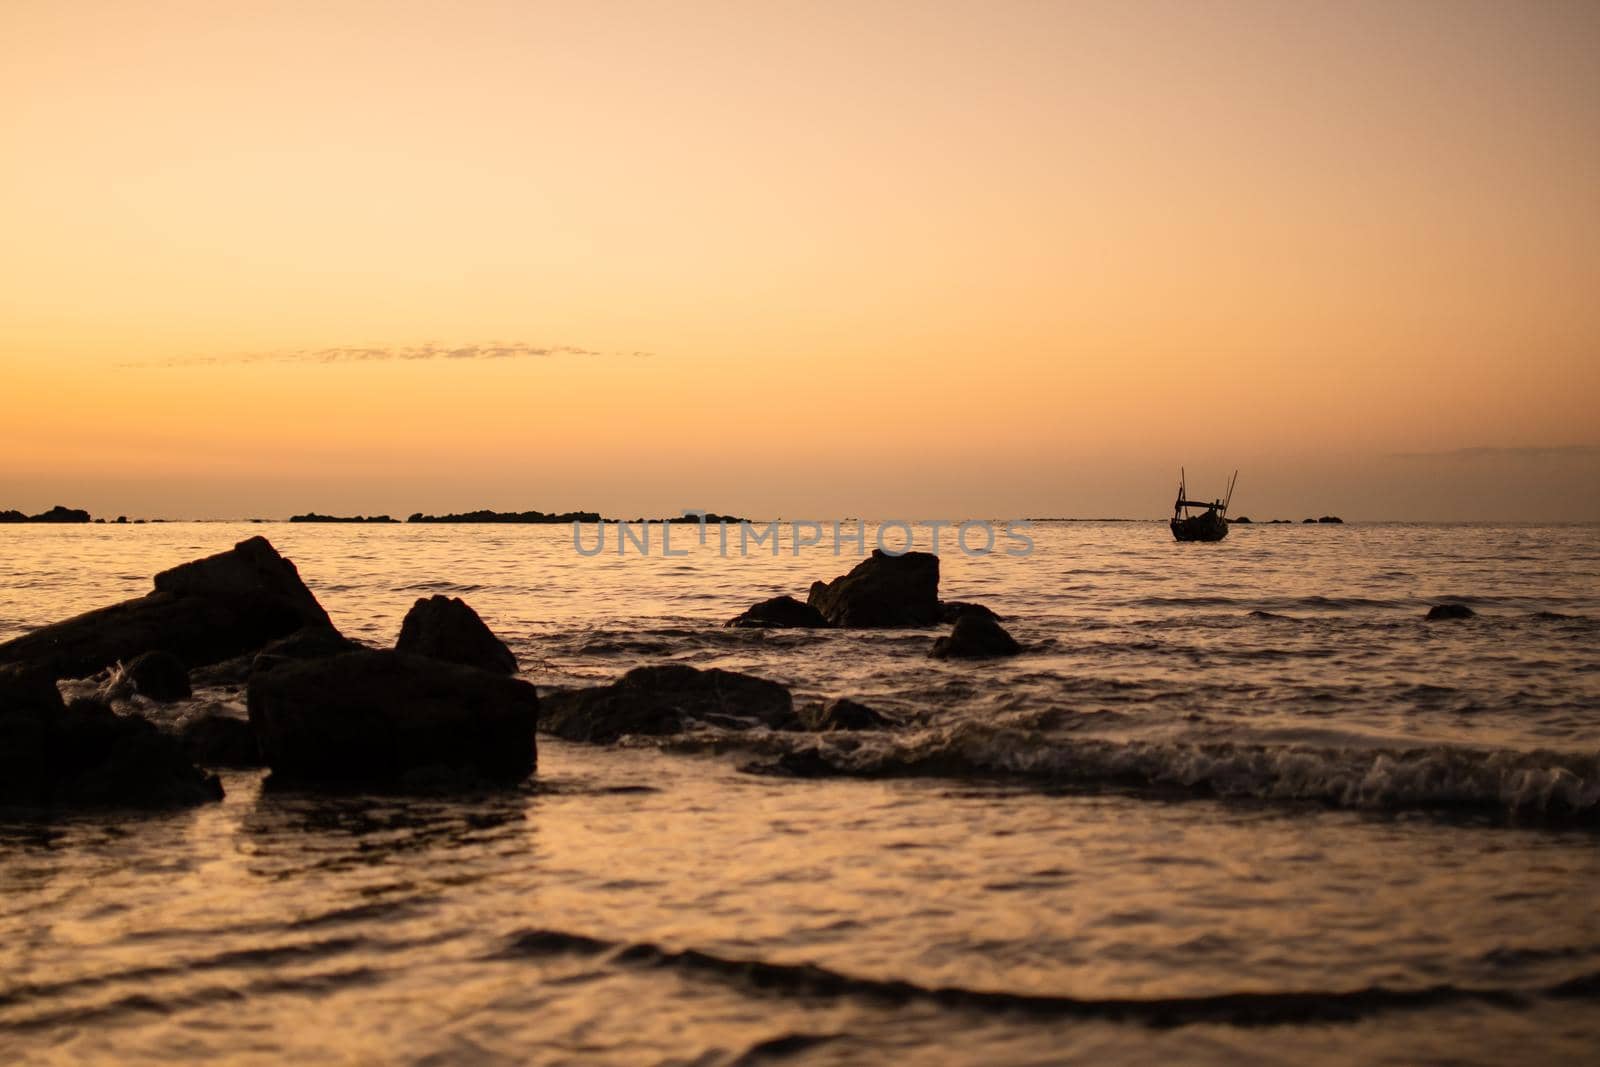 A bright golden orange sunset over a beach with rocks and a boat in the water waves near Ngwesaung beach, Irrawaddy, western Myanmar